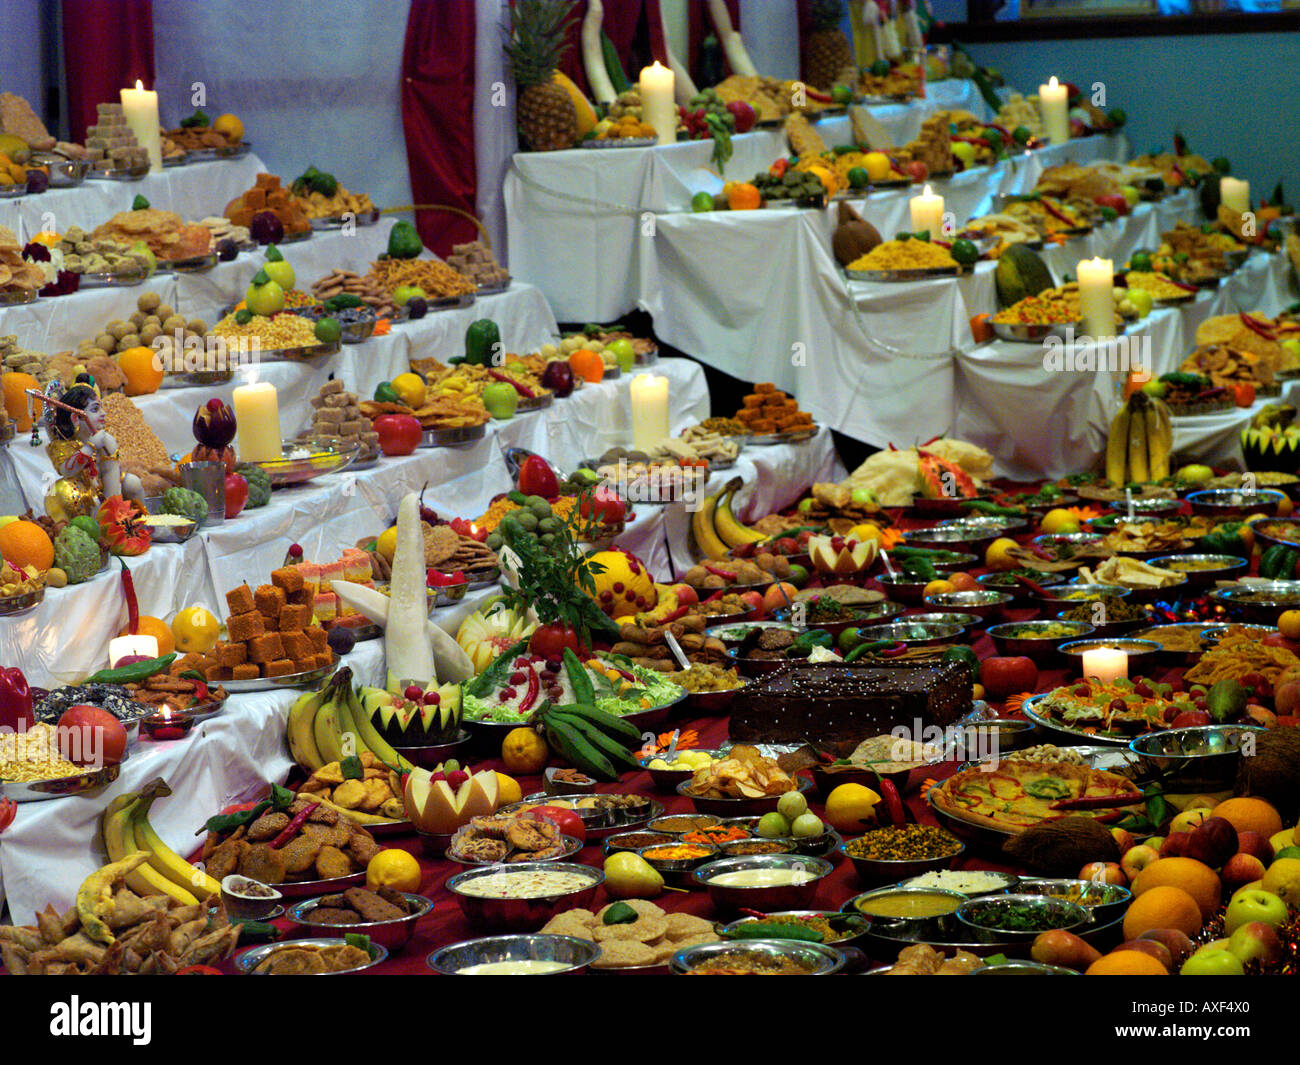 Shree Swaminarayan Temple Streatham London England Diwali Offerings One Hundred Different Dishes Prepared at the Temple Stock Photo